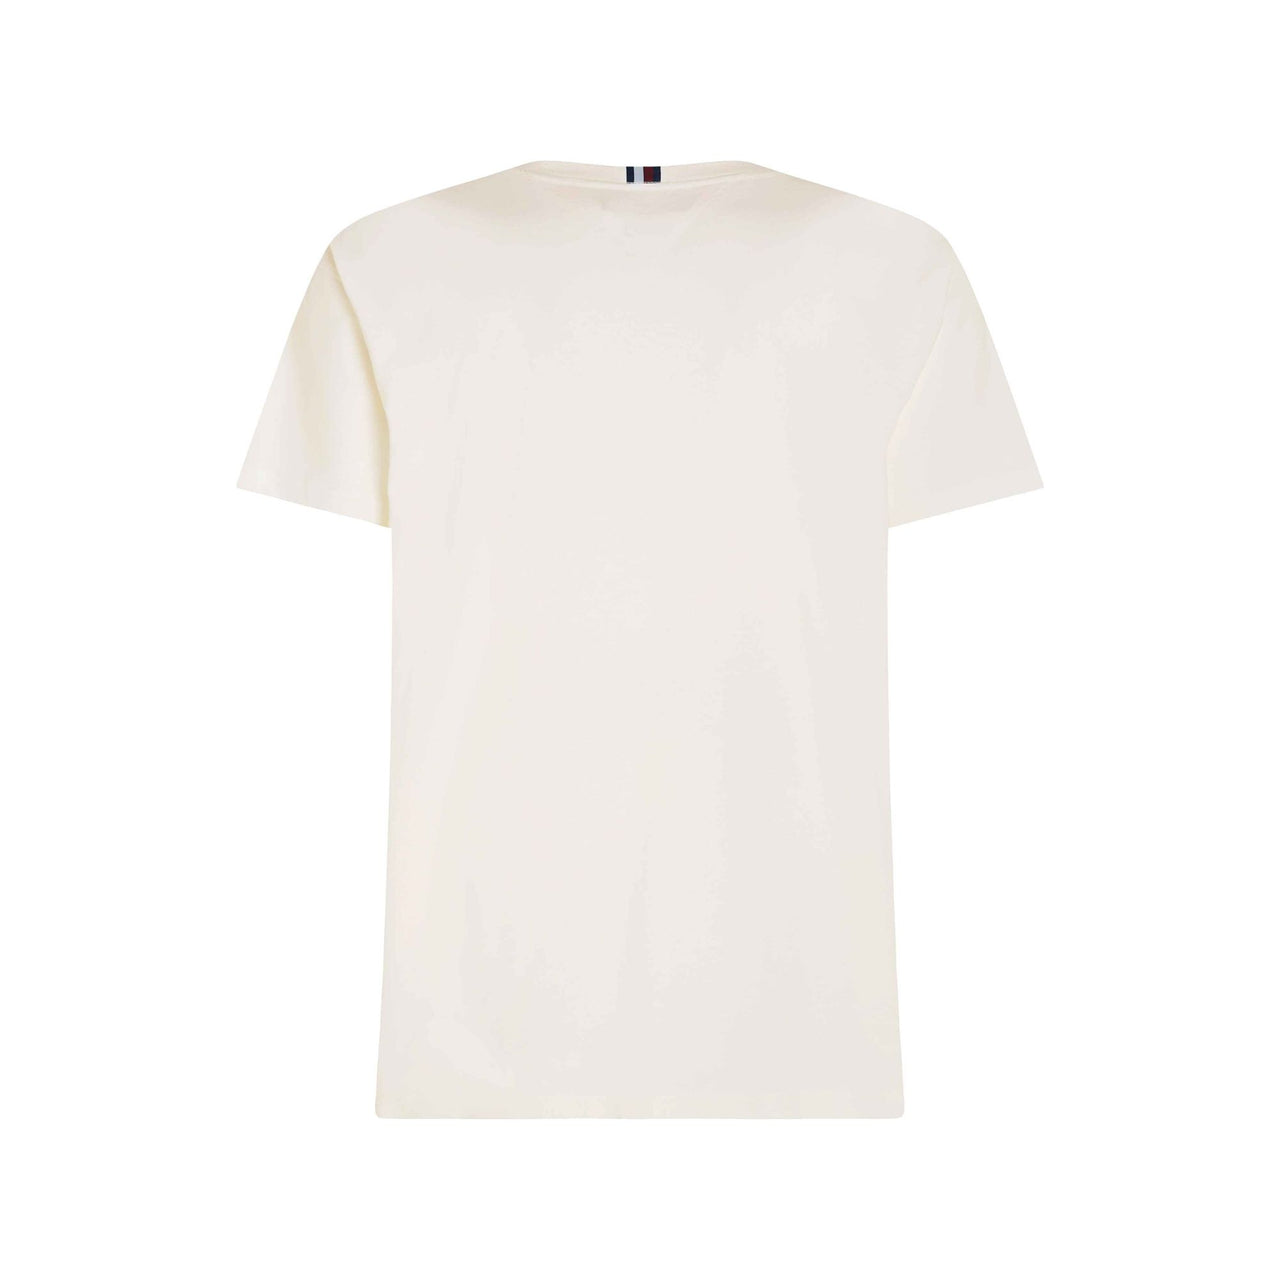 Camisetas Tommy Hilfiger Hombre Monotype Embro Archive Tee